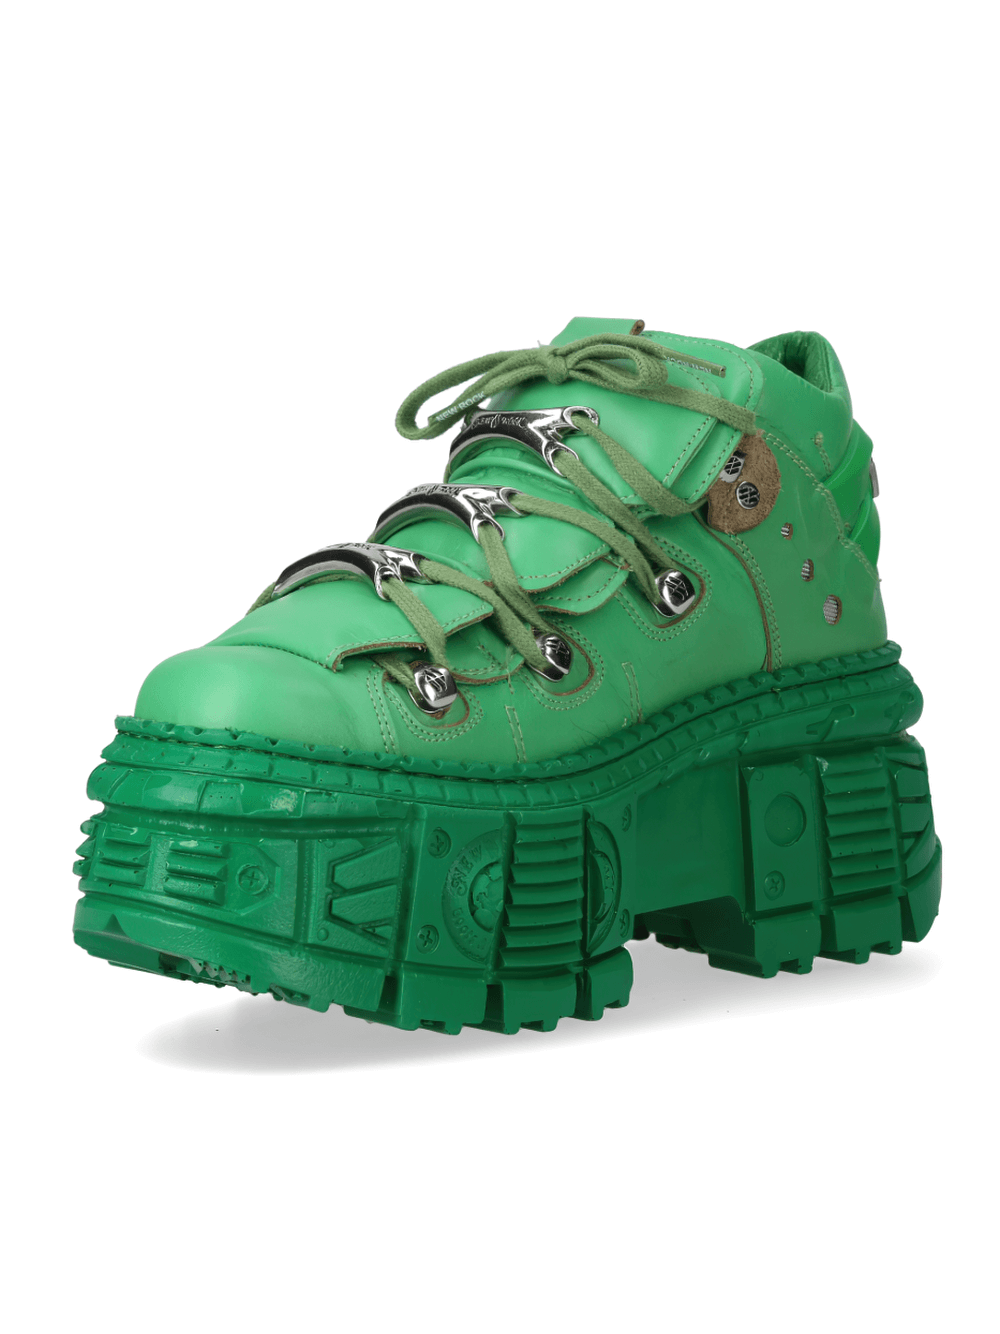 NEW ROCK Green Ankle Boots with Rock and Fashion Edge